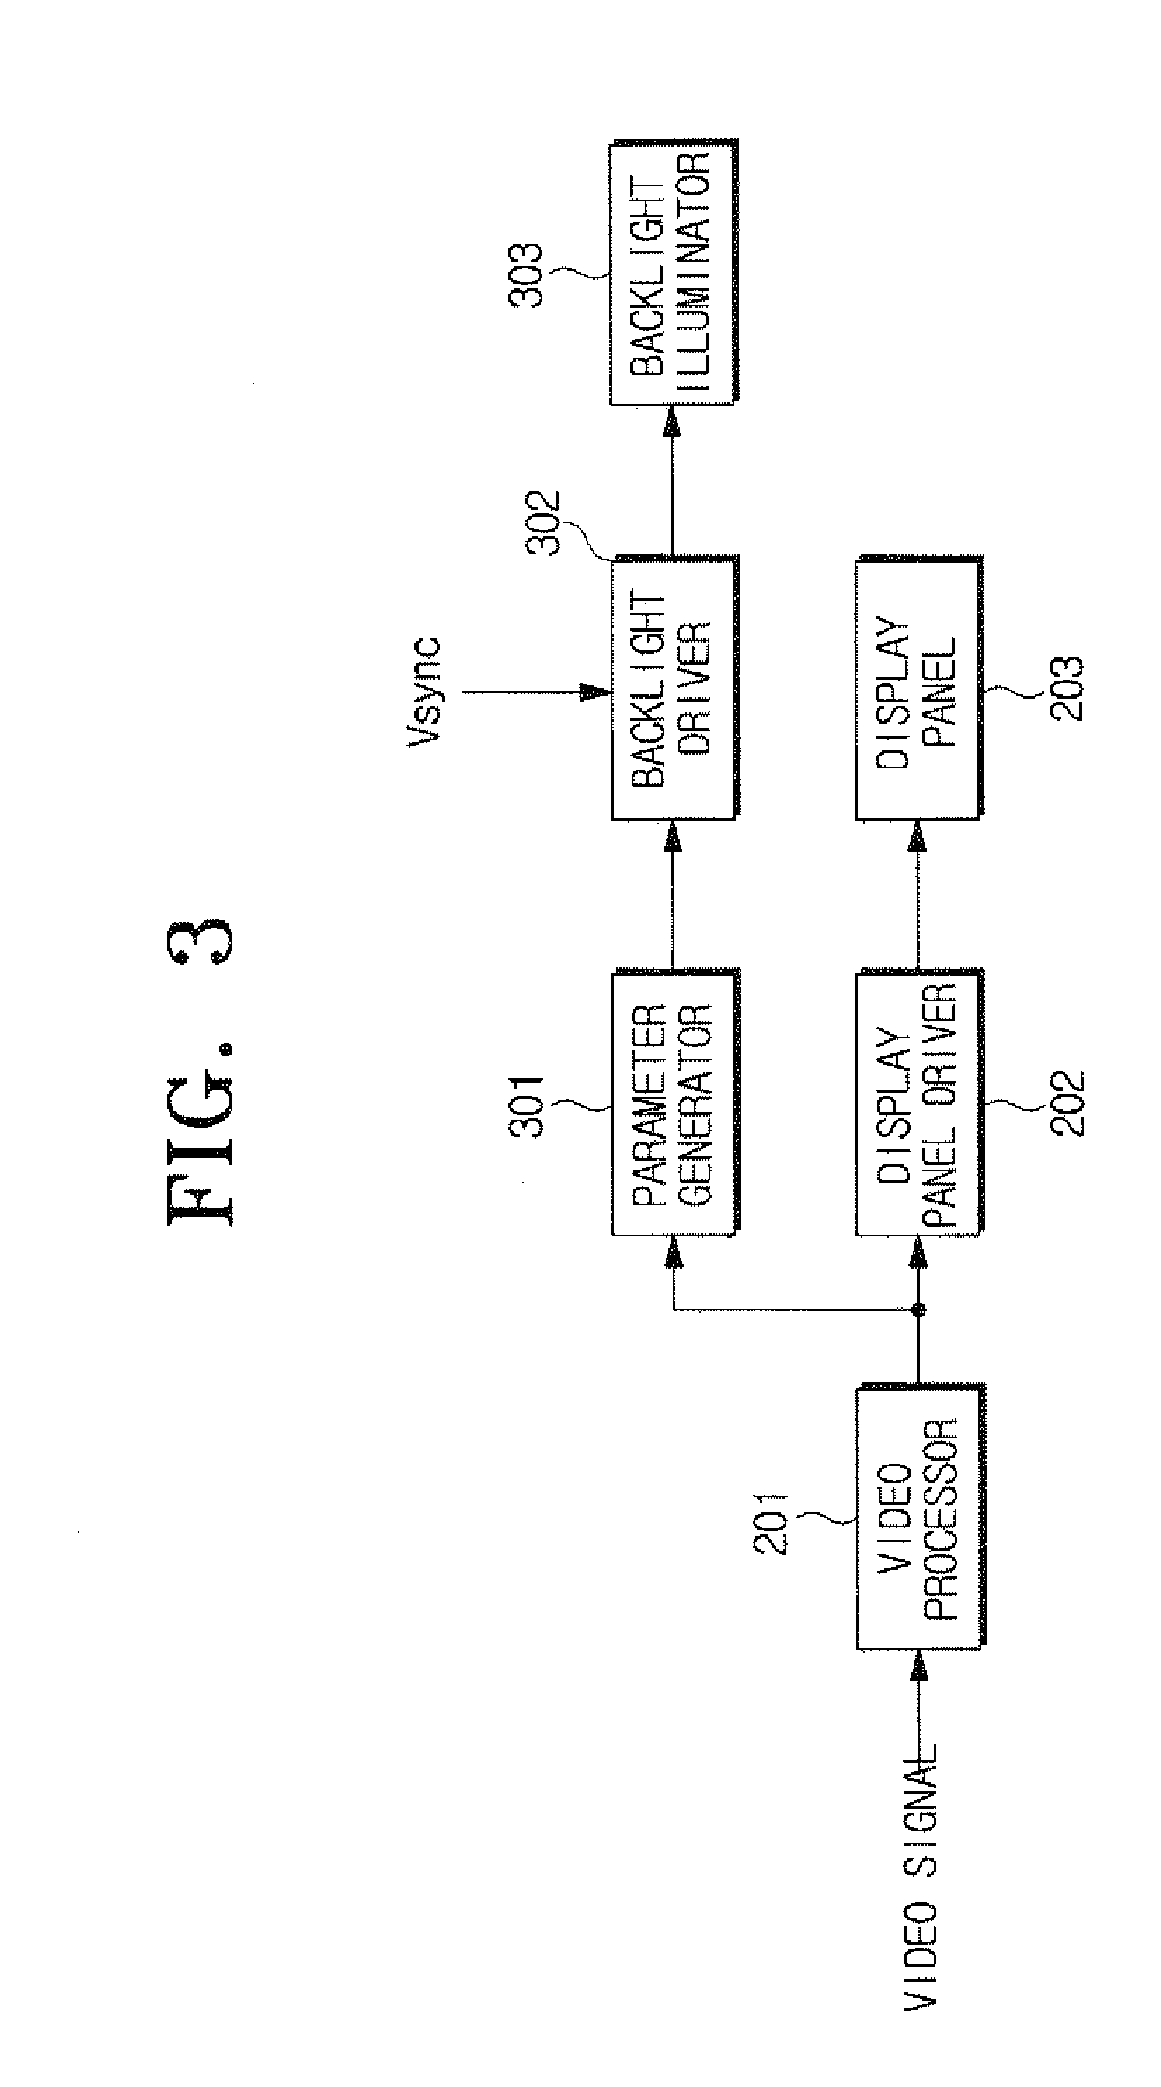 Display apparatus and backlight scanning method thereof